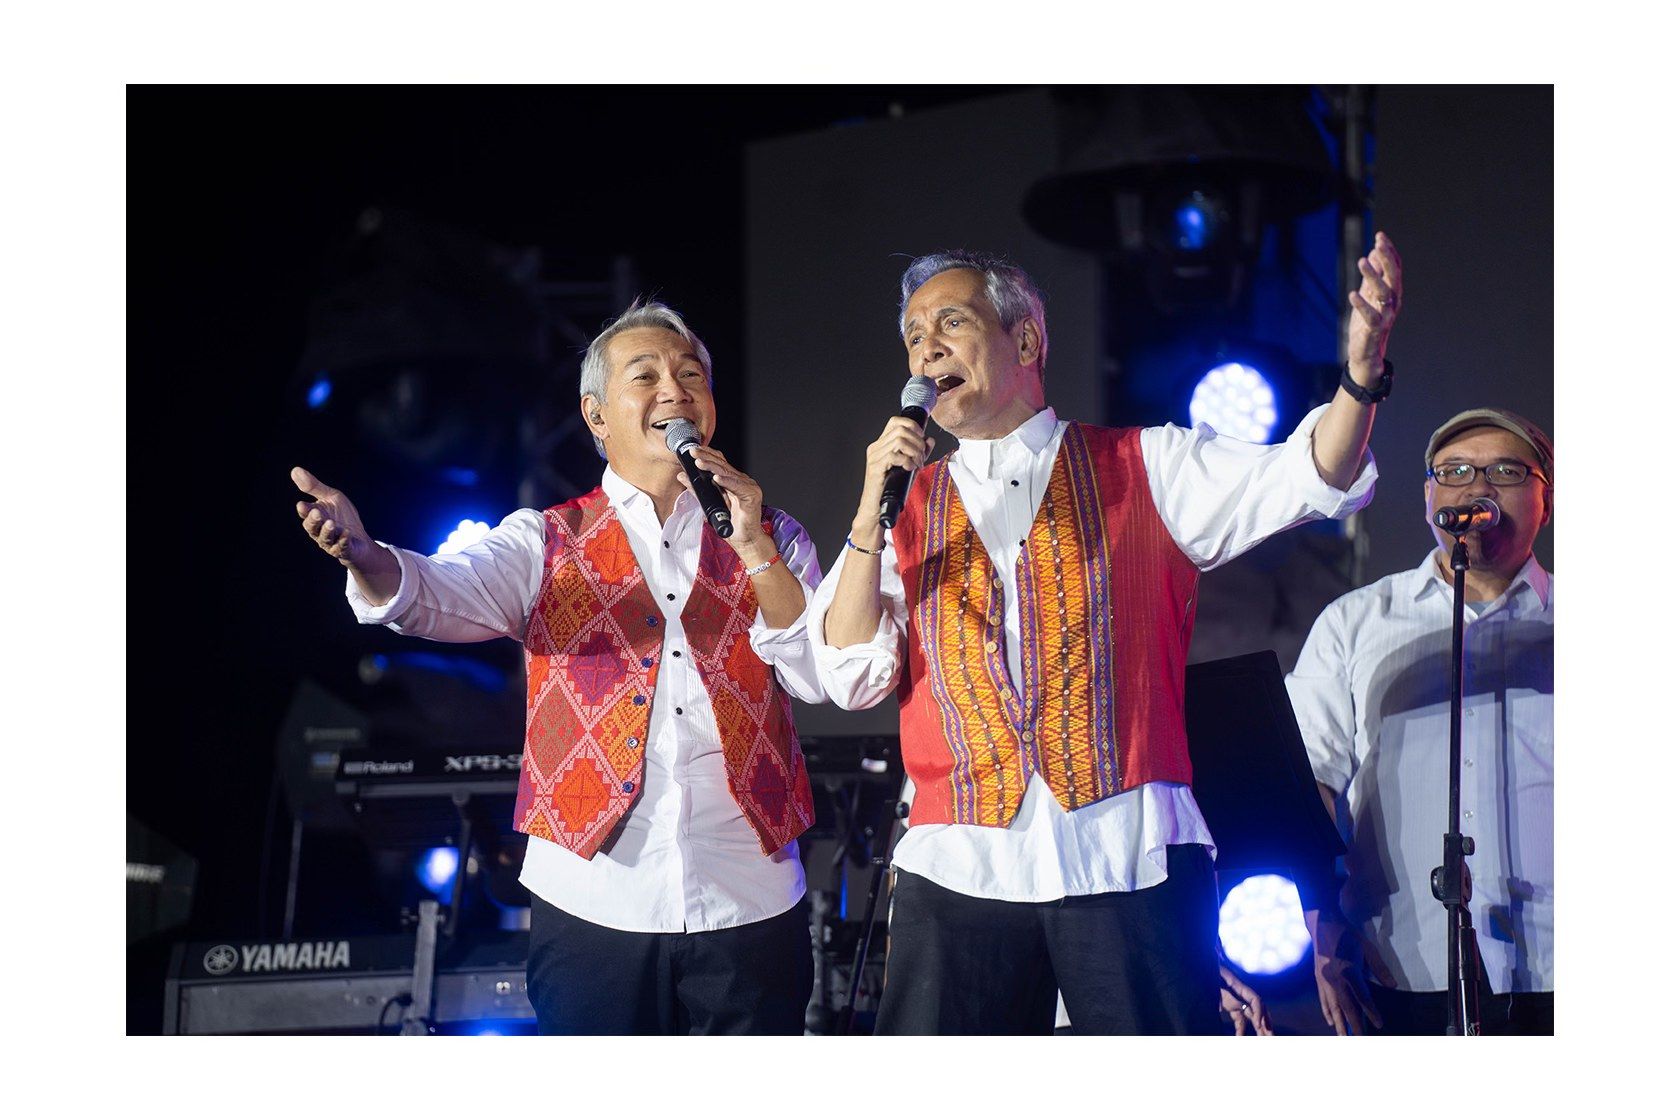 Richard and Lucy welcome APO Hiking Society in Ormoc City_